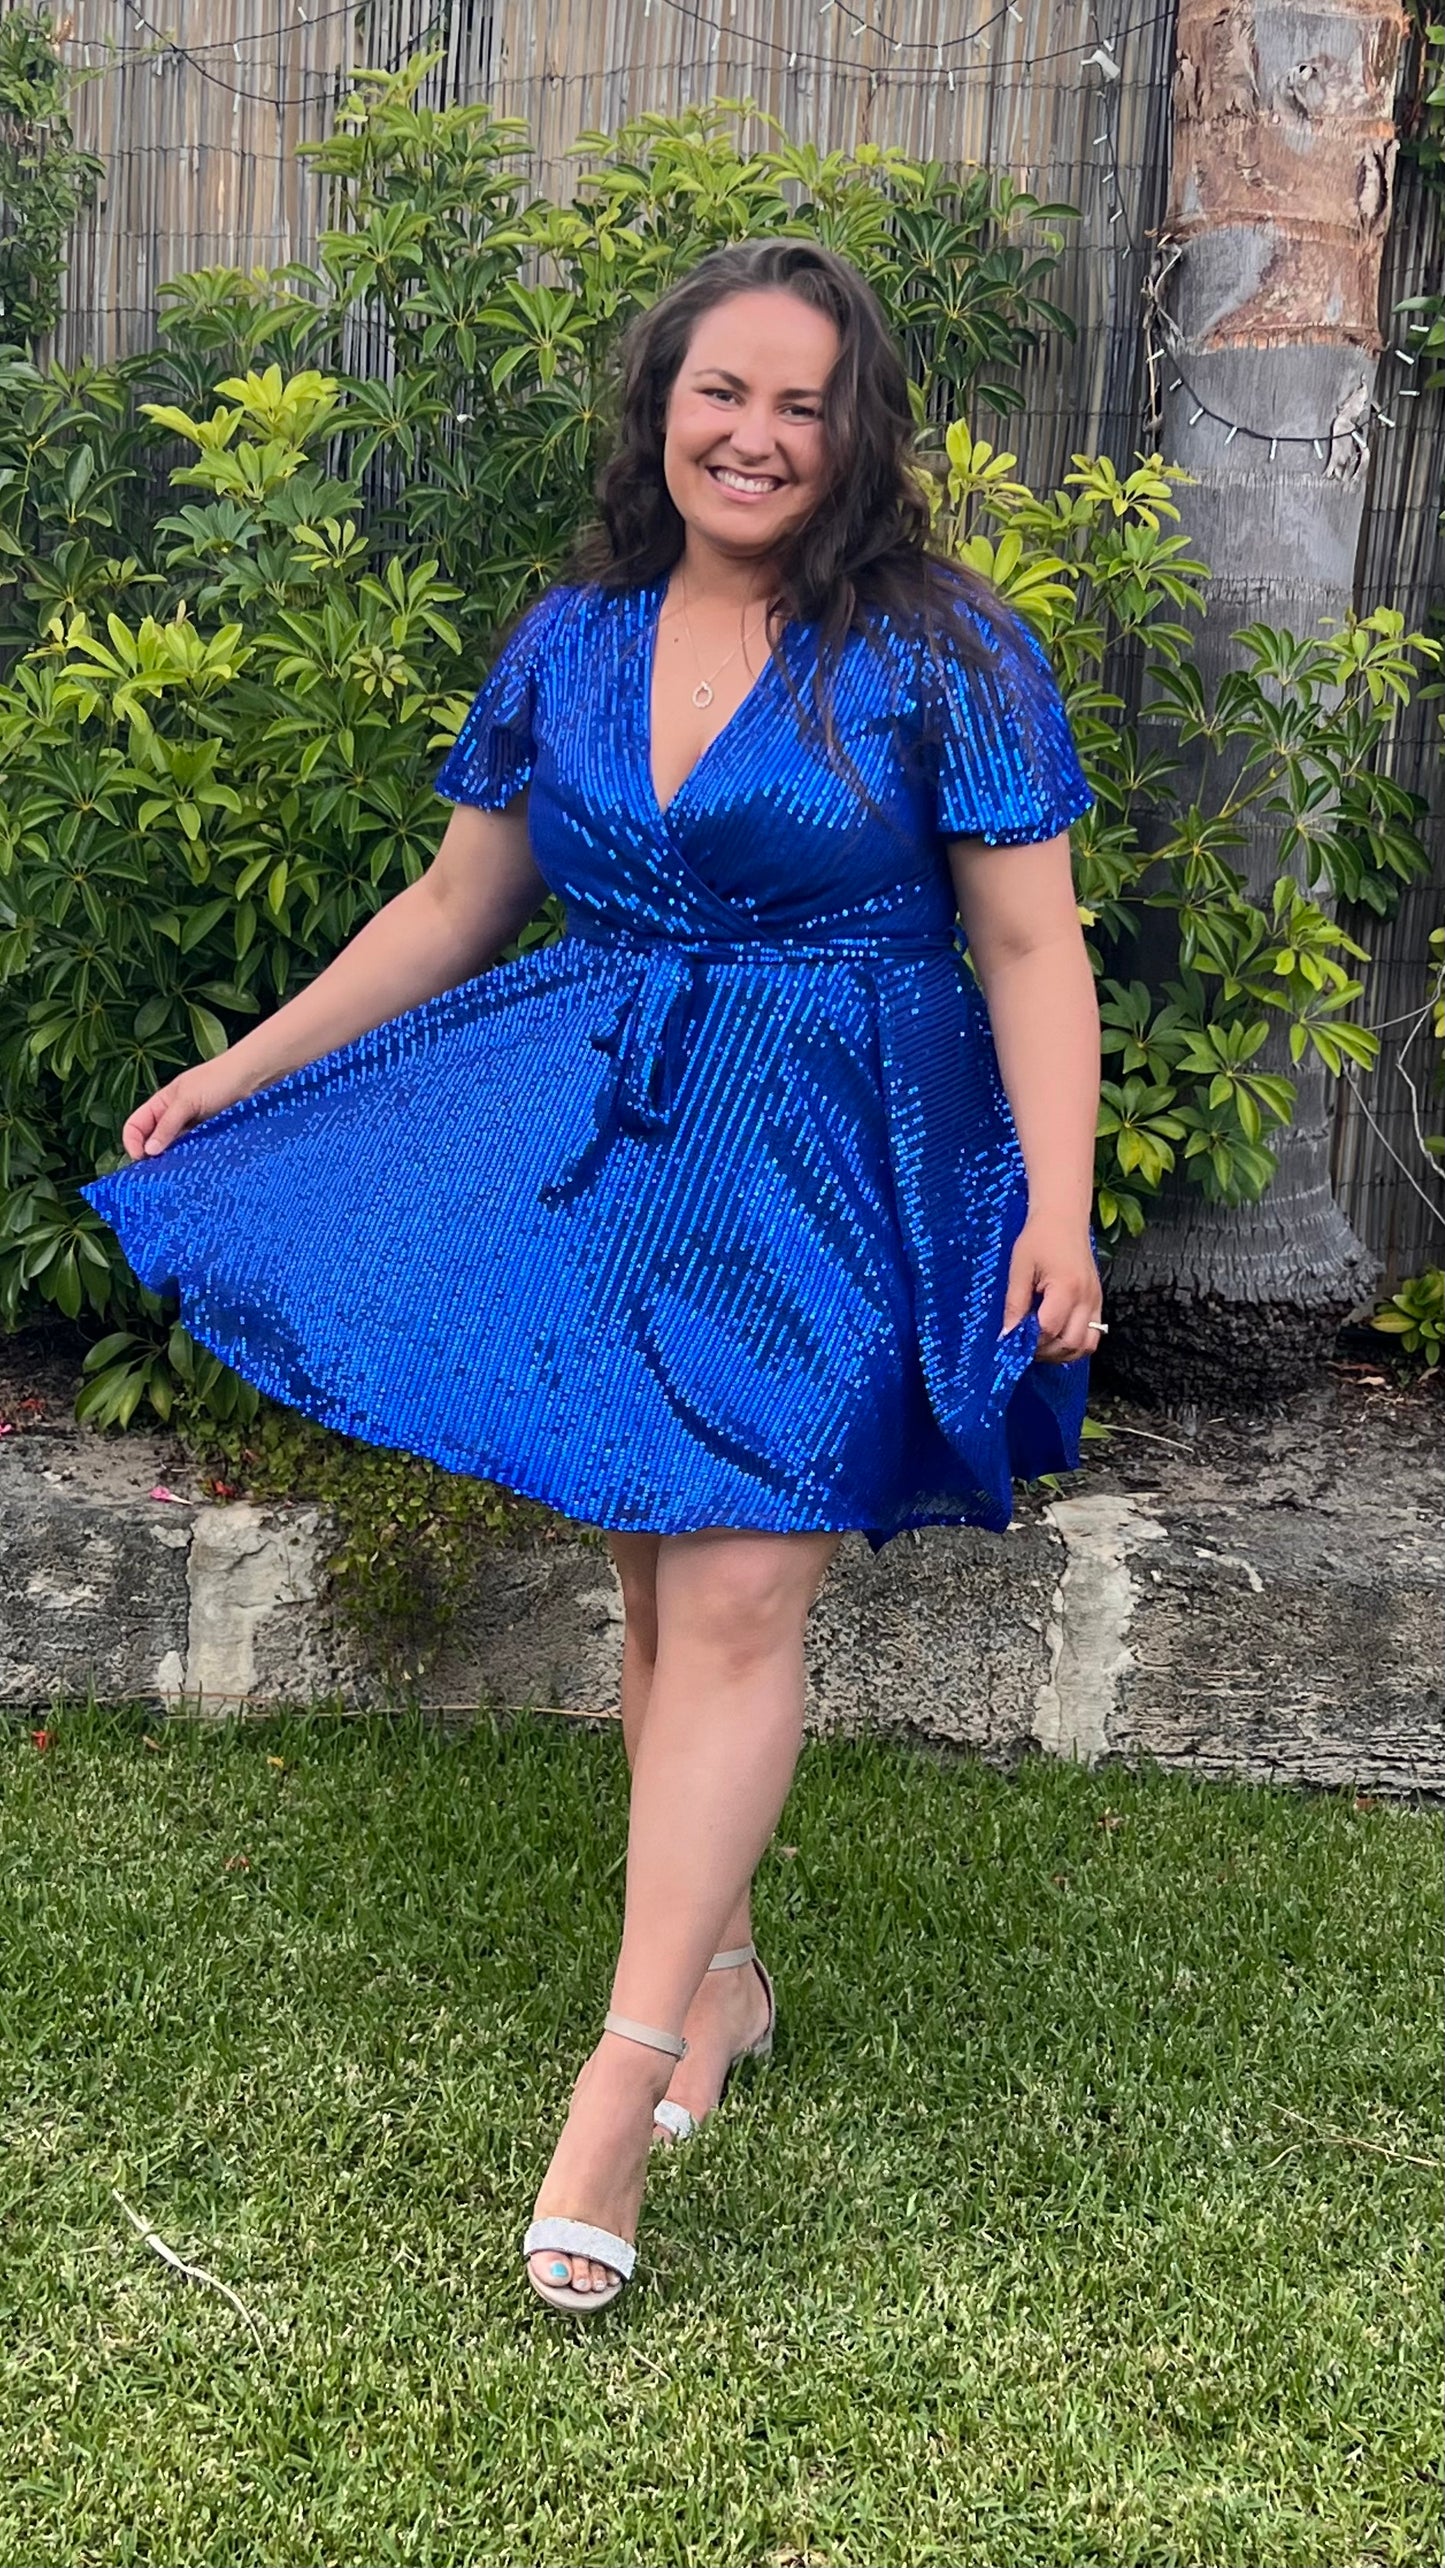 Myria Sequin Dress: Myria is here and ready to party! This sequin number is a fun and flirty mini dress, perfect for dancing the night away

Bra friendly
Pull aside breastfeeding access - Ciao Bella Dresses 